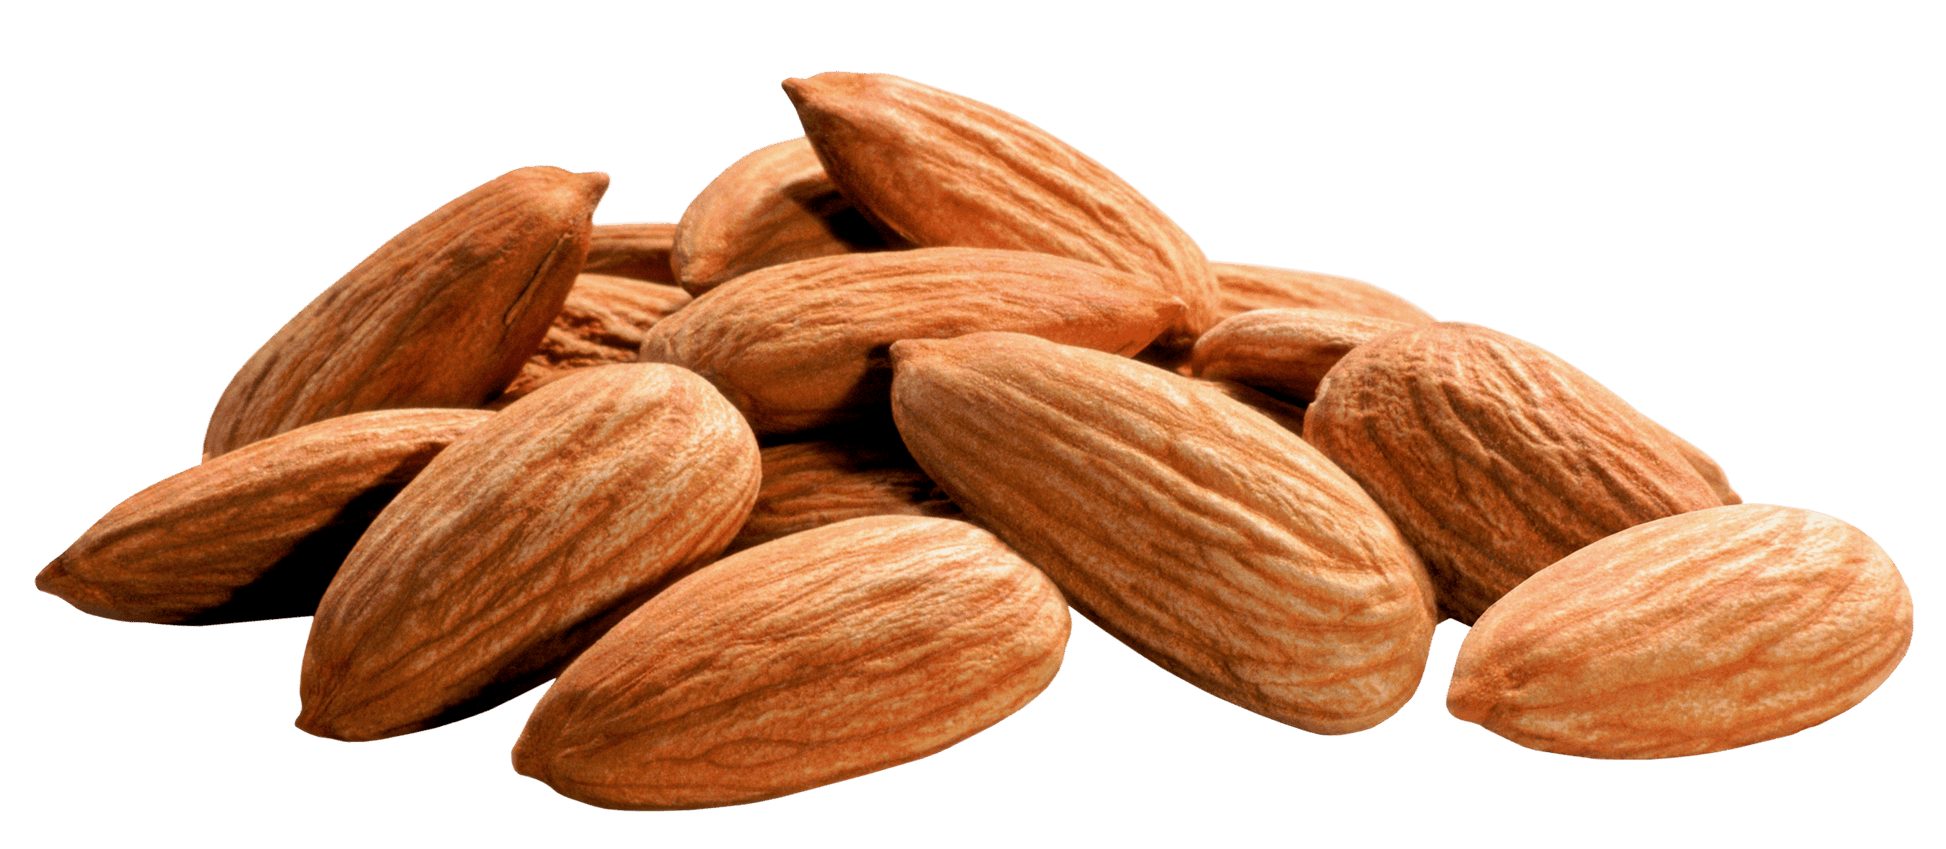 Buy almond nuts online - EAT Anytime